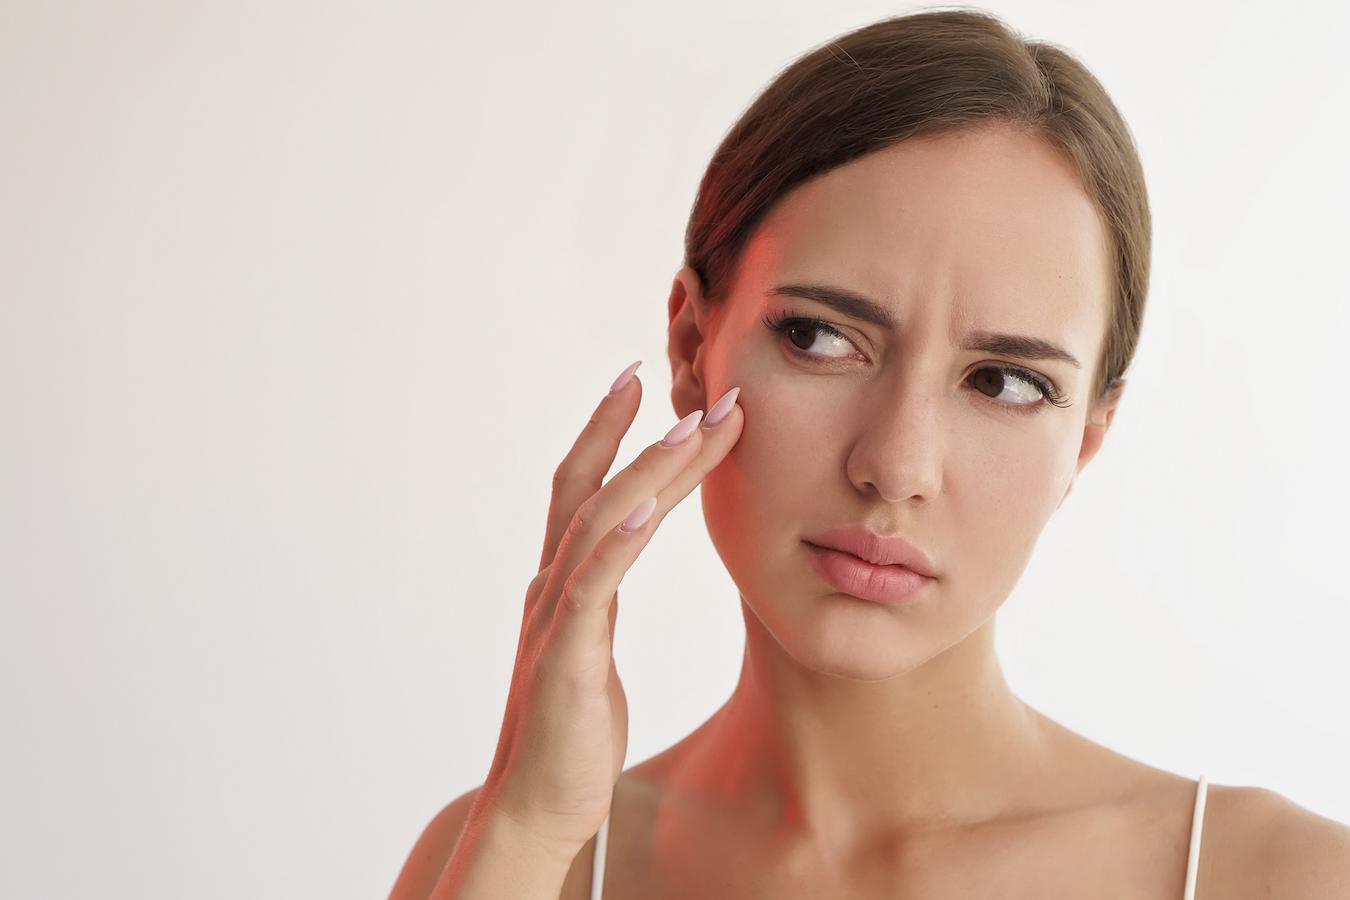 Sometimes acne medications are required to treat extremely acne and dry skin